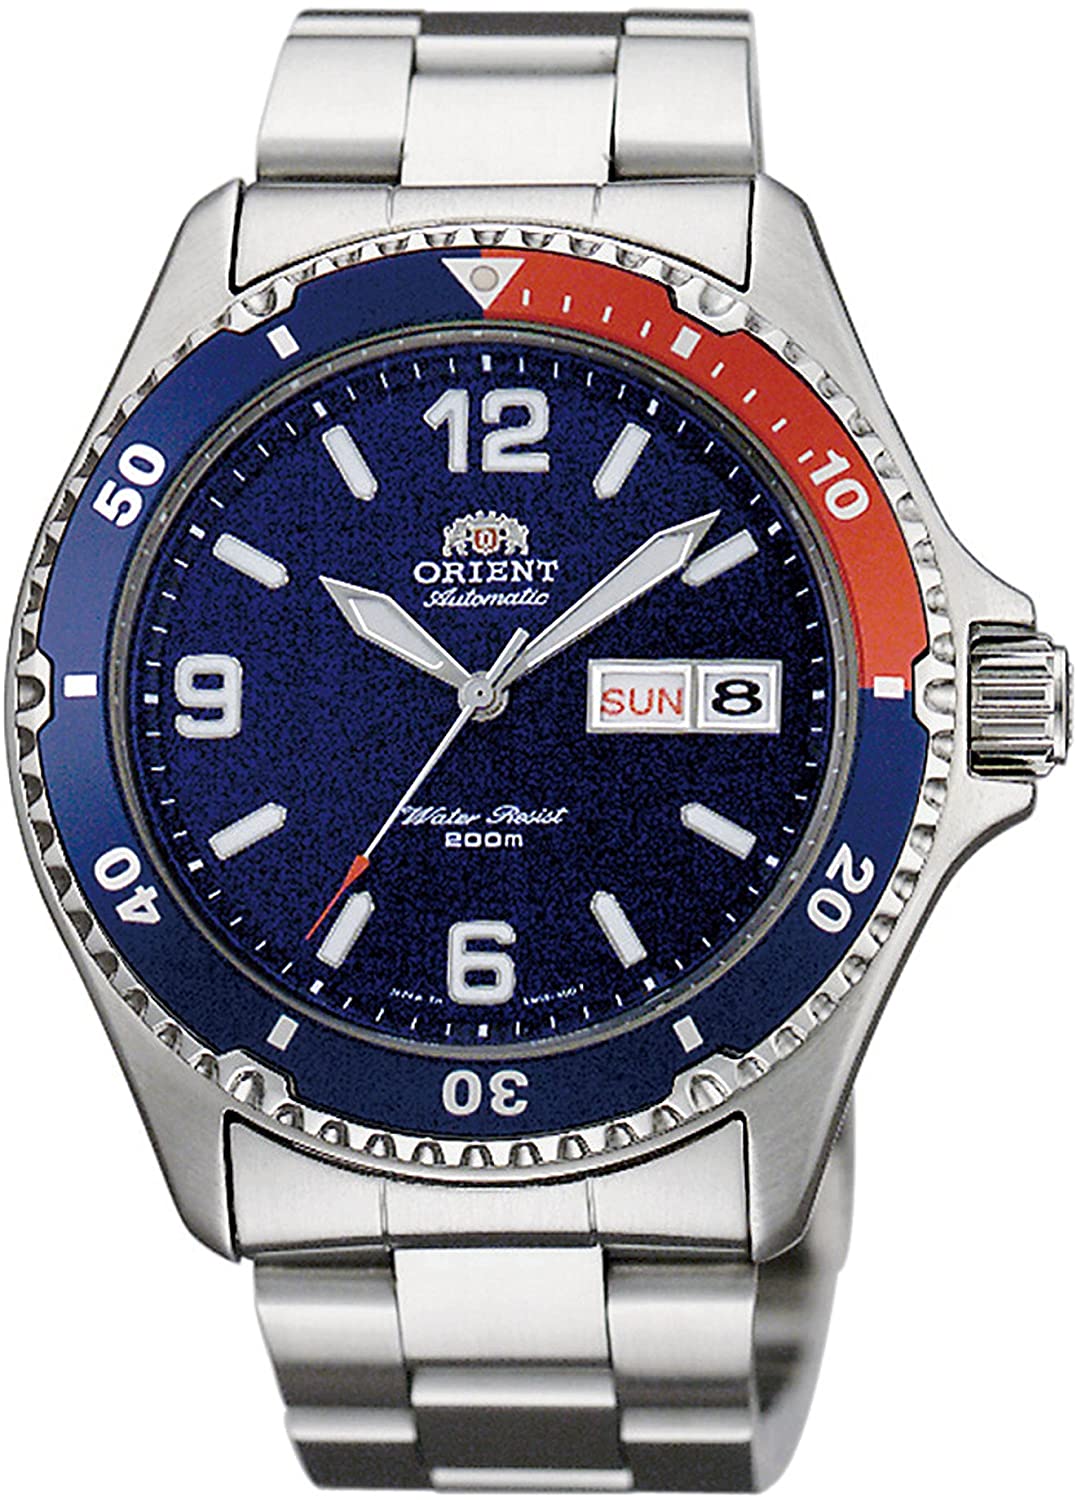 ORIENT Automatic Mako Mako Divers Watch SAA02009D3 - Discovery